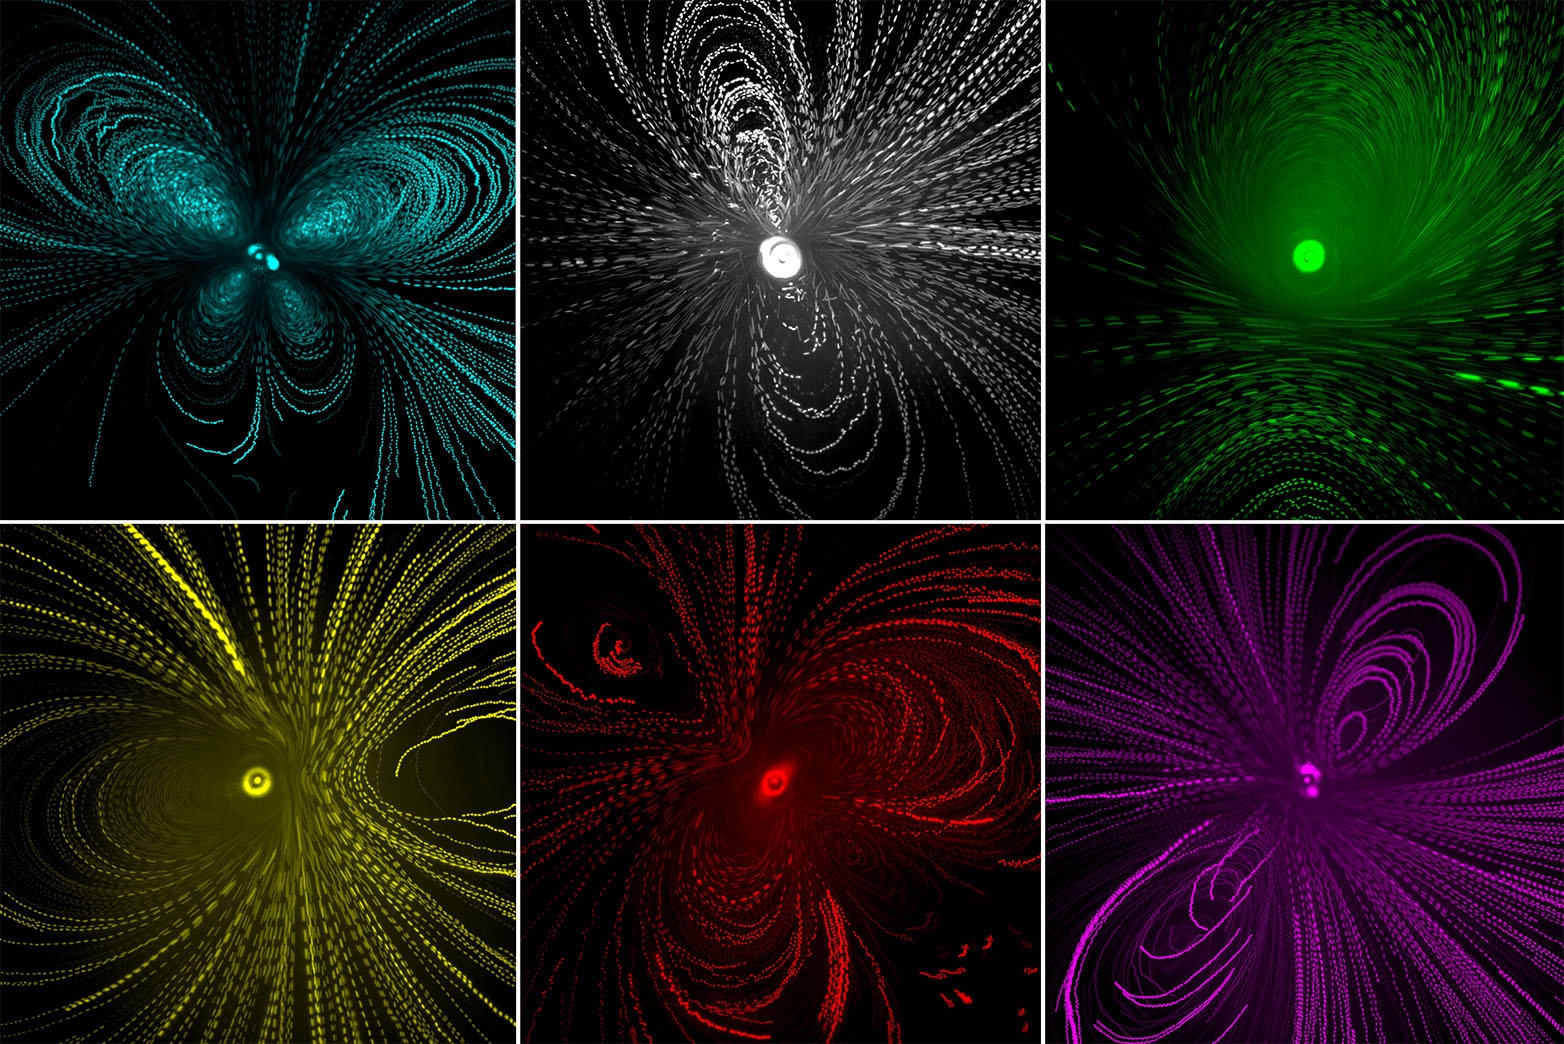 Six vortex patterns in different colors (top from left to right: blue, white, green; bottom from left to right: yellow, red, magenta